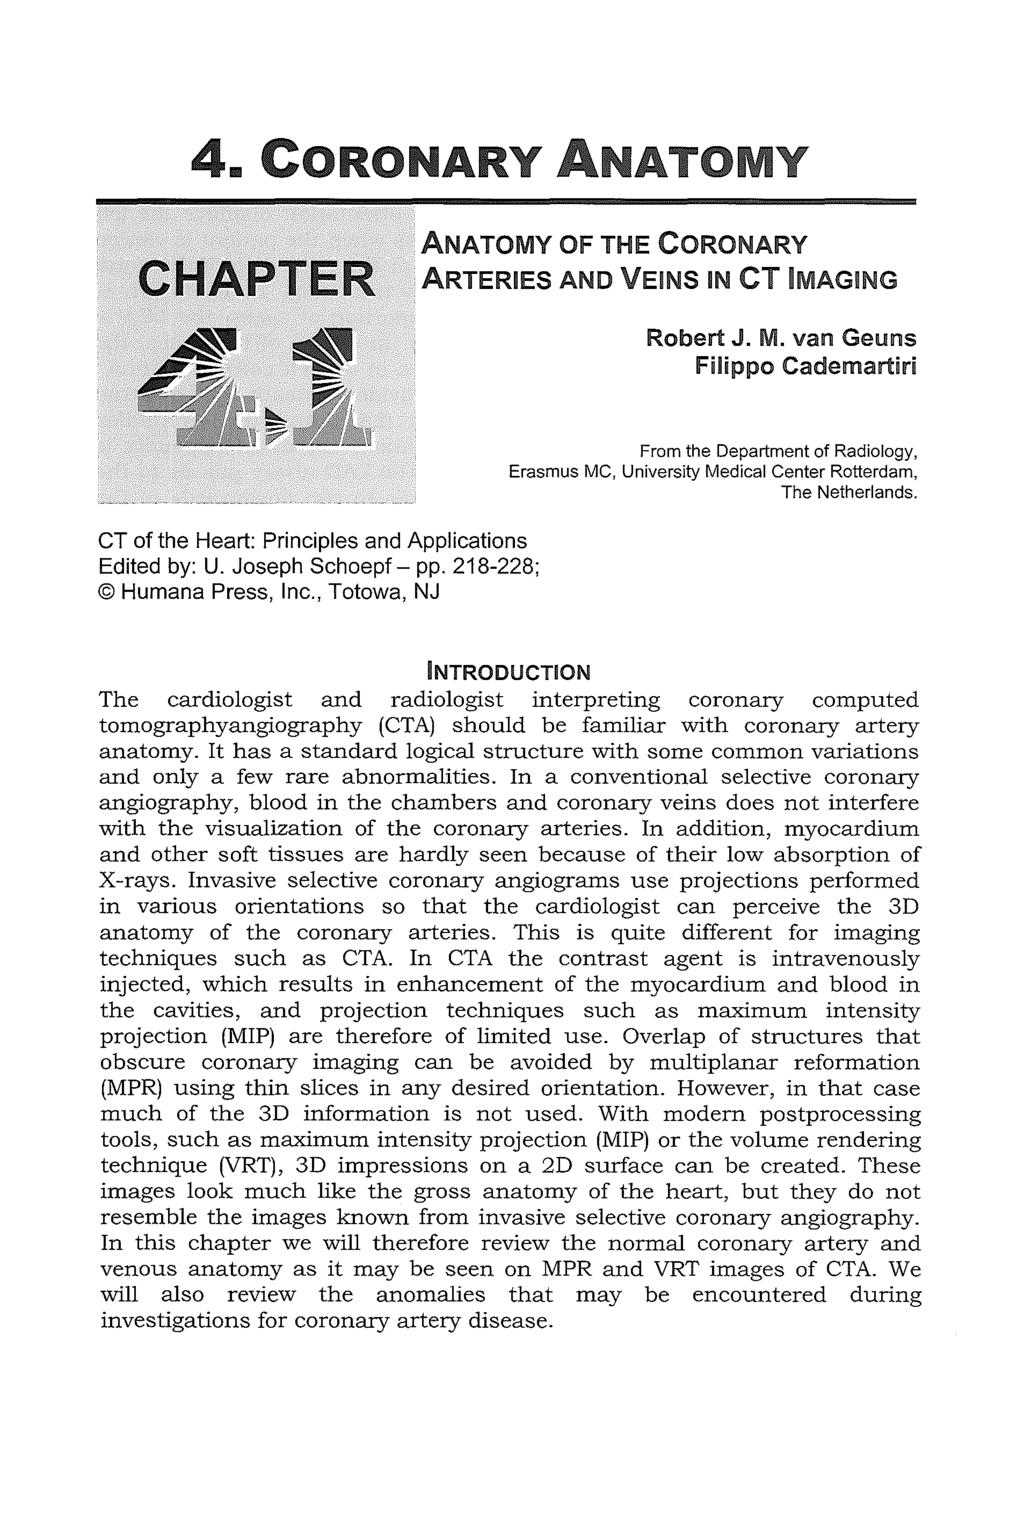 4~~CORONARY NATO MY CHAPTER ANATOMY OF THE CORONARY ARTERIES AND VEINS IN CT IMAGING Robert J. M. van Geuns Filippo Cademartiri CT of the Heart: Principles and Applications Edited by: U.